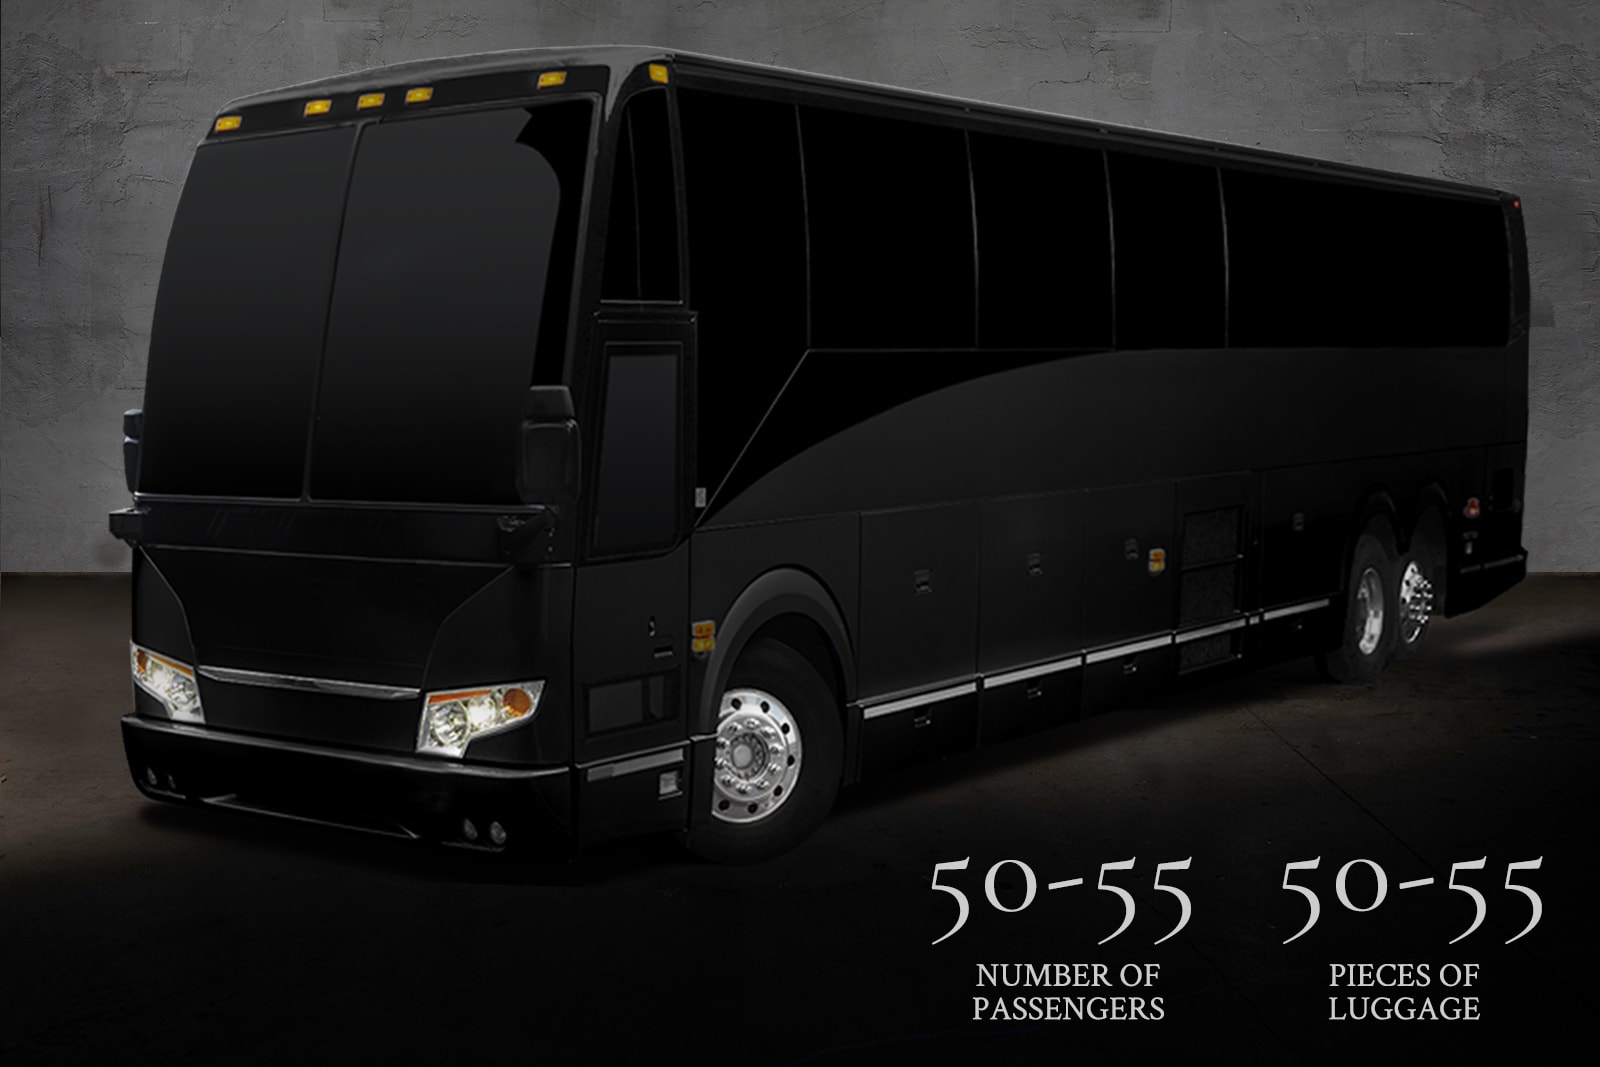 Prestige motor coach, a perfect limo rental for up to 55 people.